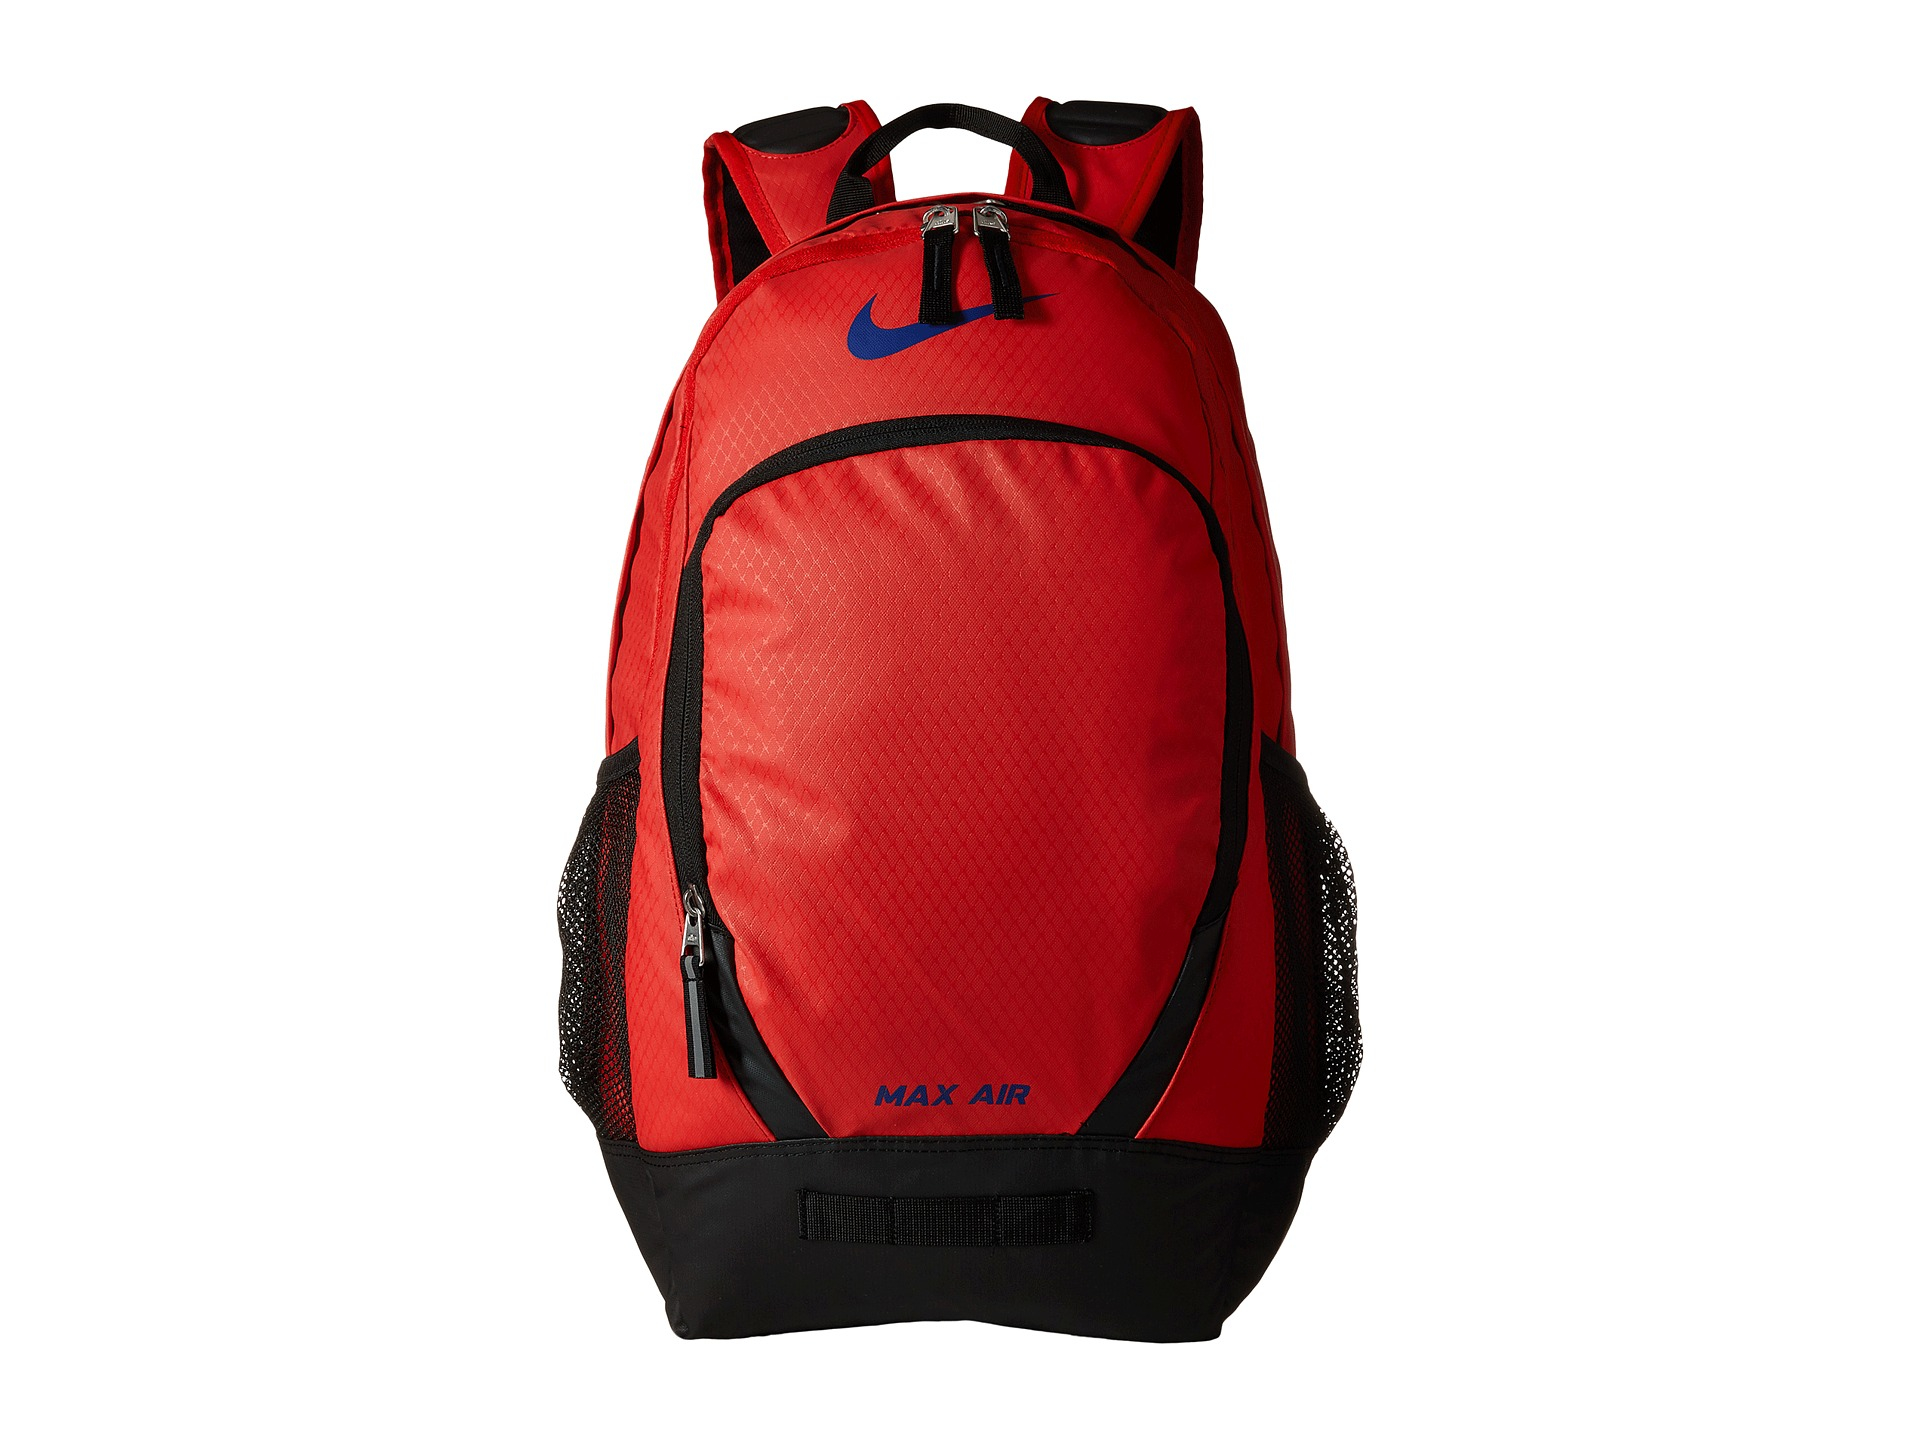 Lyst - Nike Team Training Max Air Large Backpack in Red